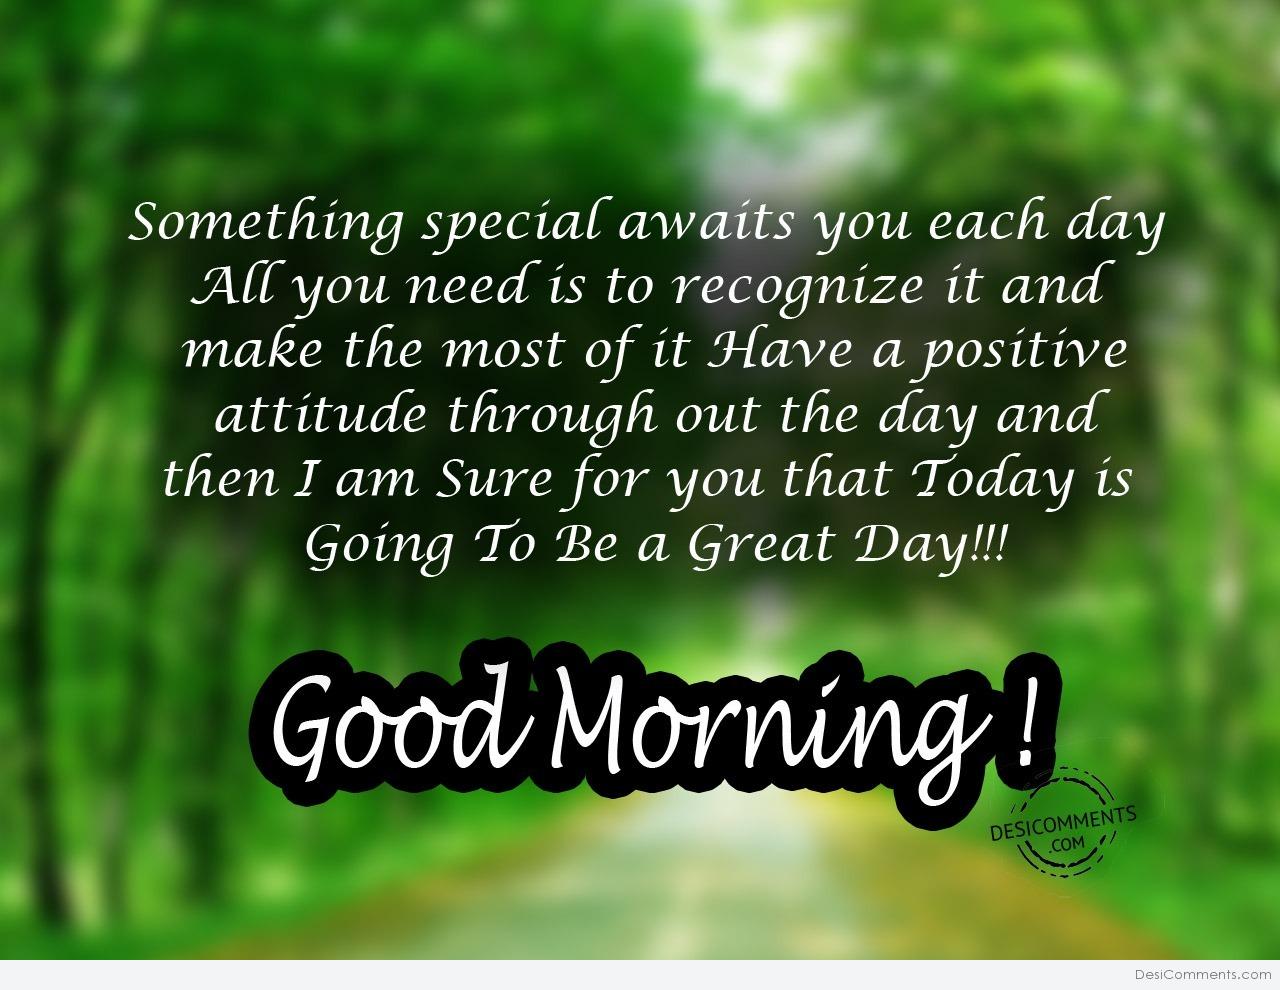 Something Special Awaits – Good Morning - DesiComments.com